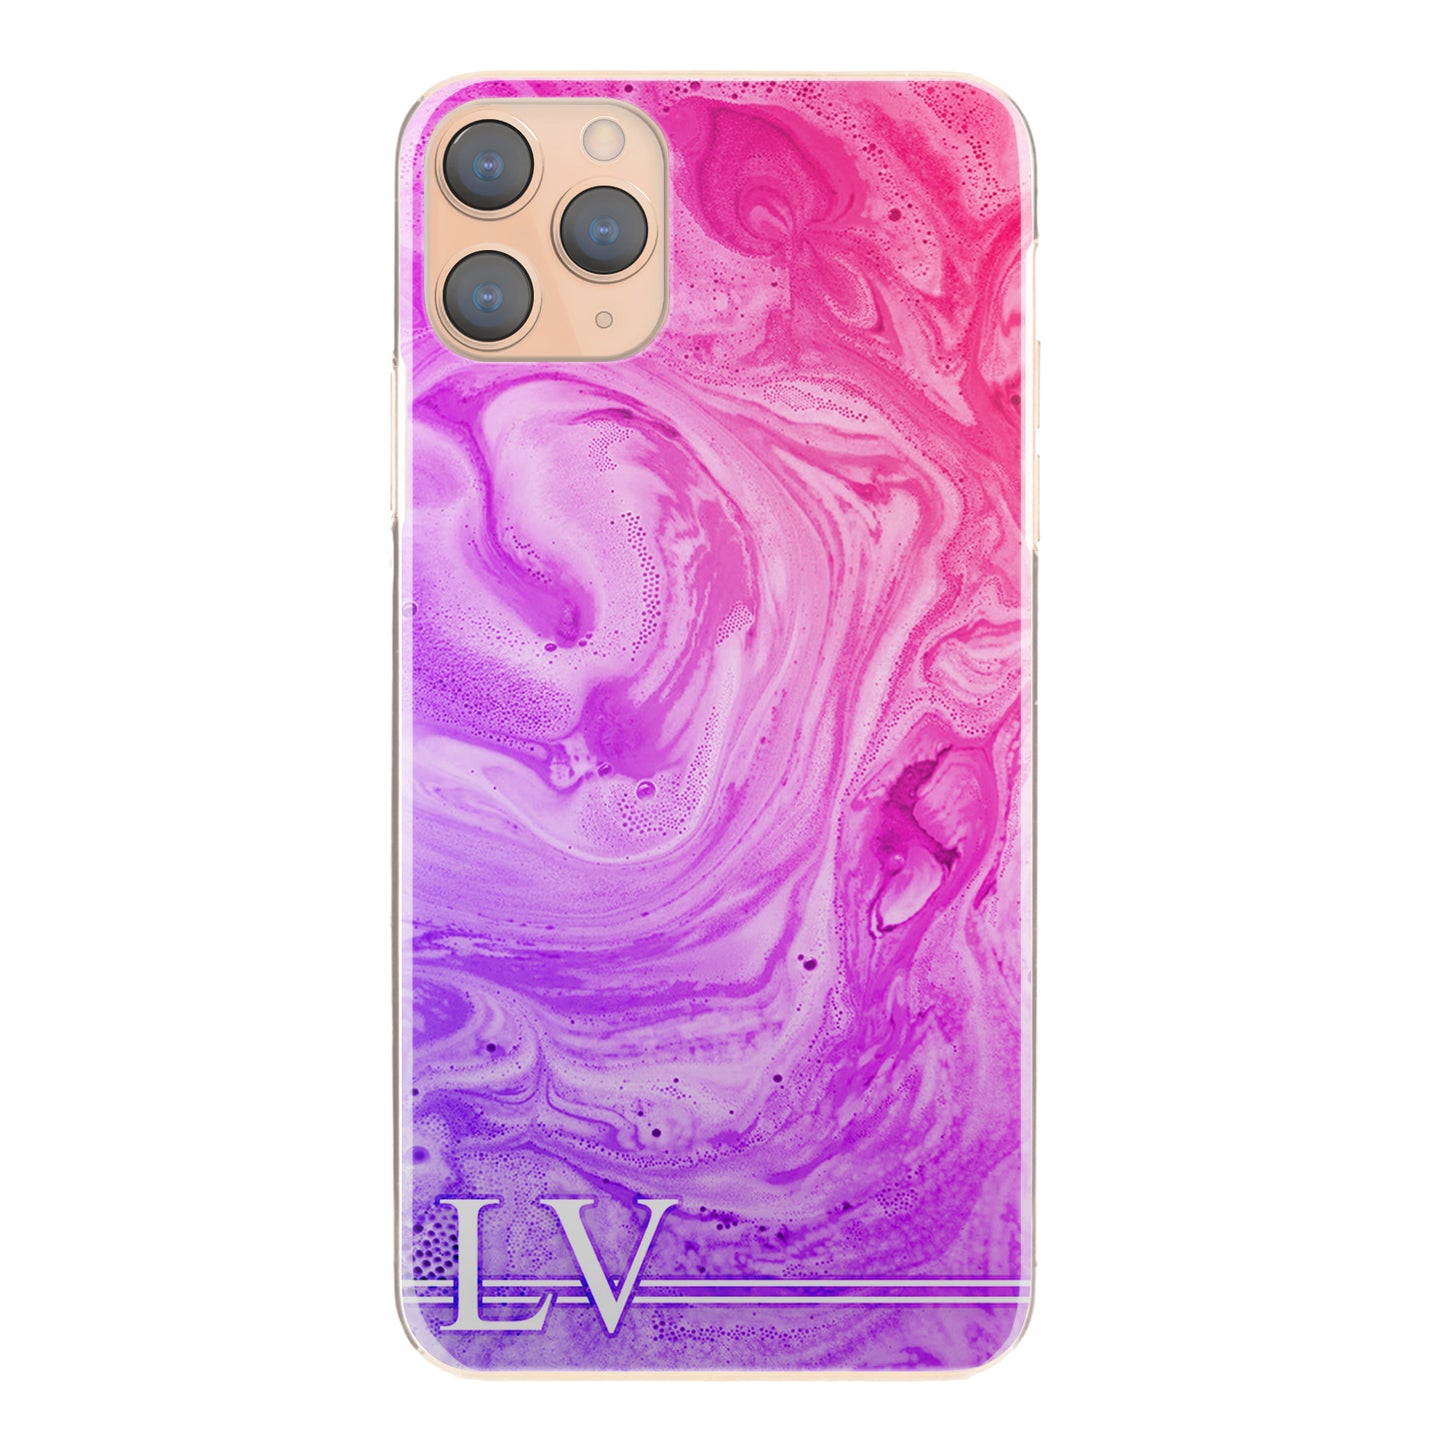 Personalised Apple iPhone Hard Case with White Initials on Purple Pink Gradient Swirled Marble